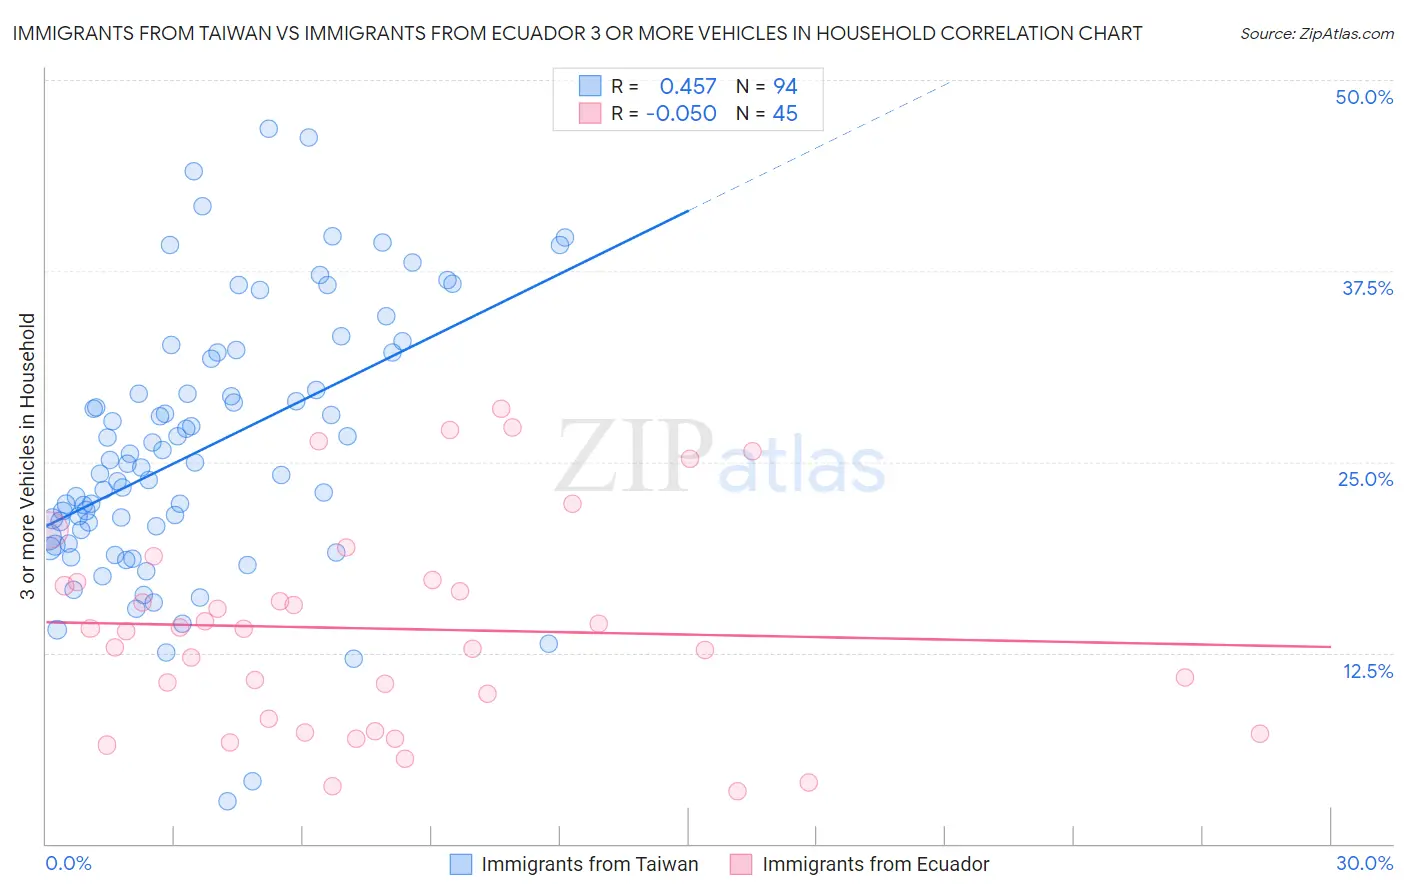 Immigrants from Taiwan vs Immigrants from Ecuador 3 or more Vehicles in Household